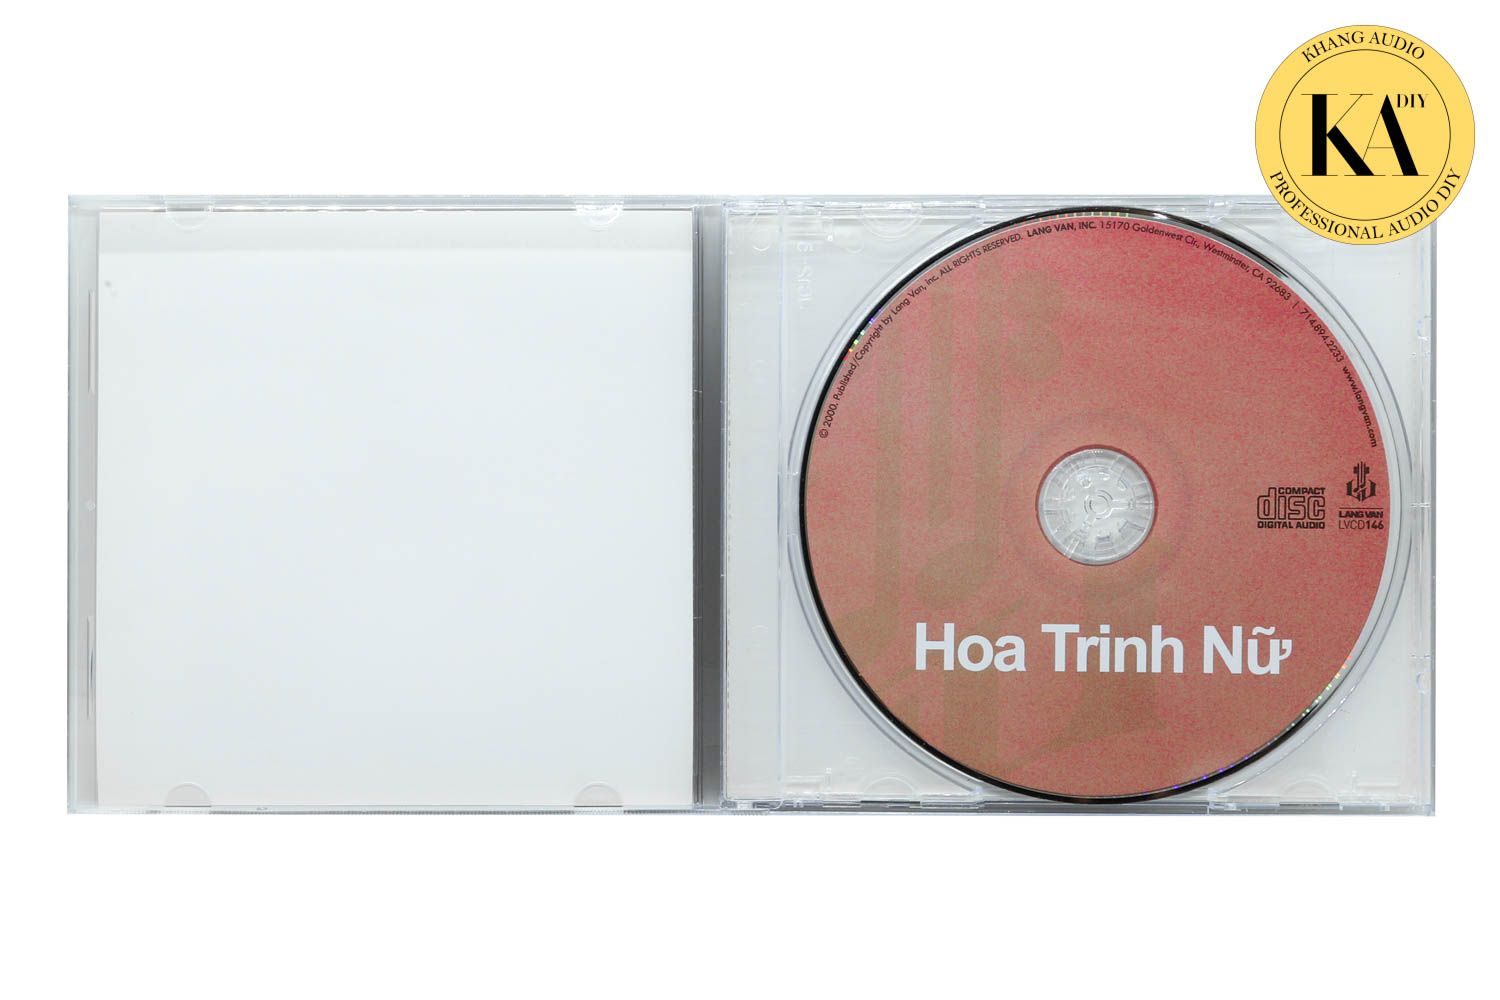 The Best Of Chế Linh - Chế Linh Khang Audio 0336380099